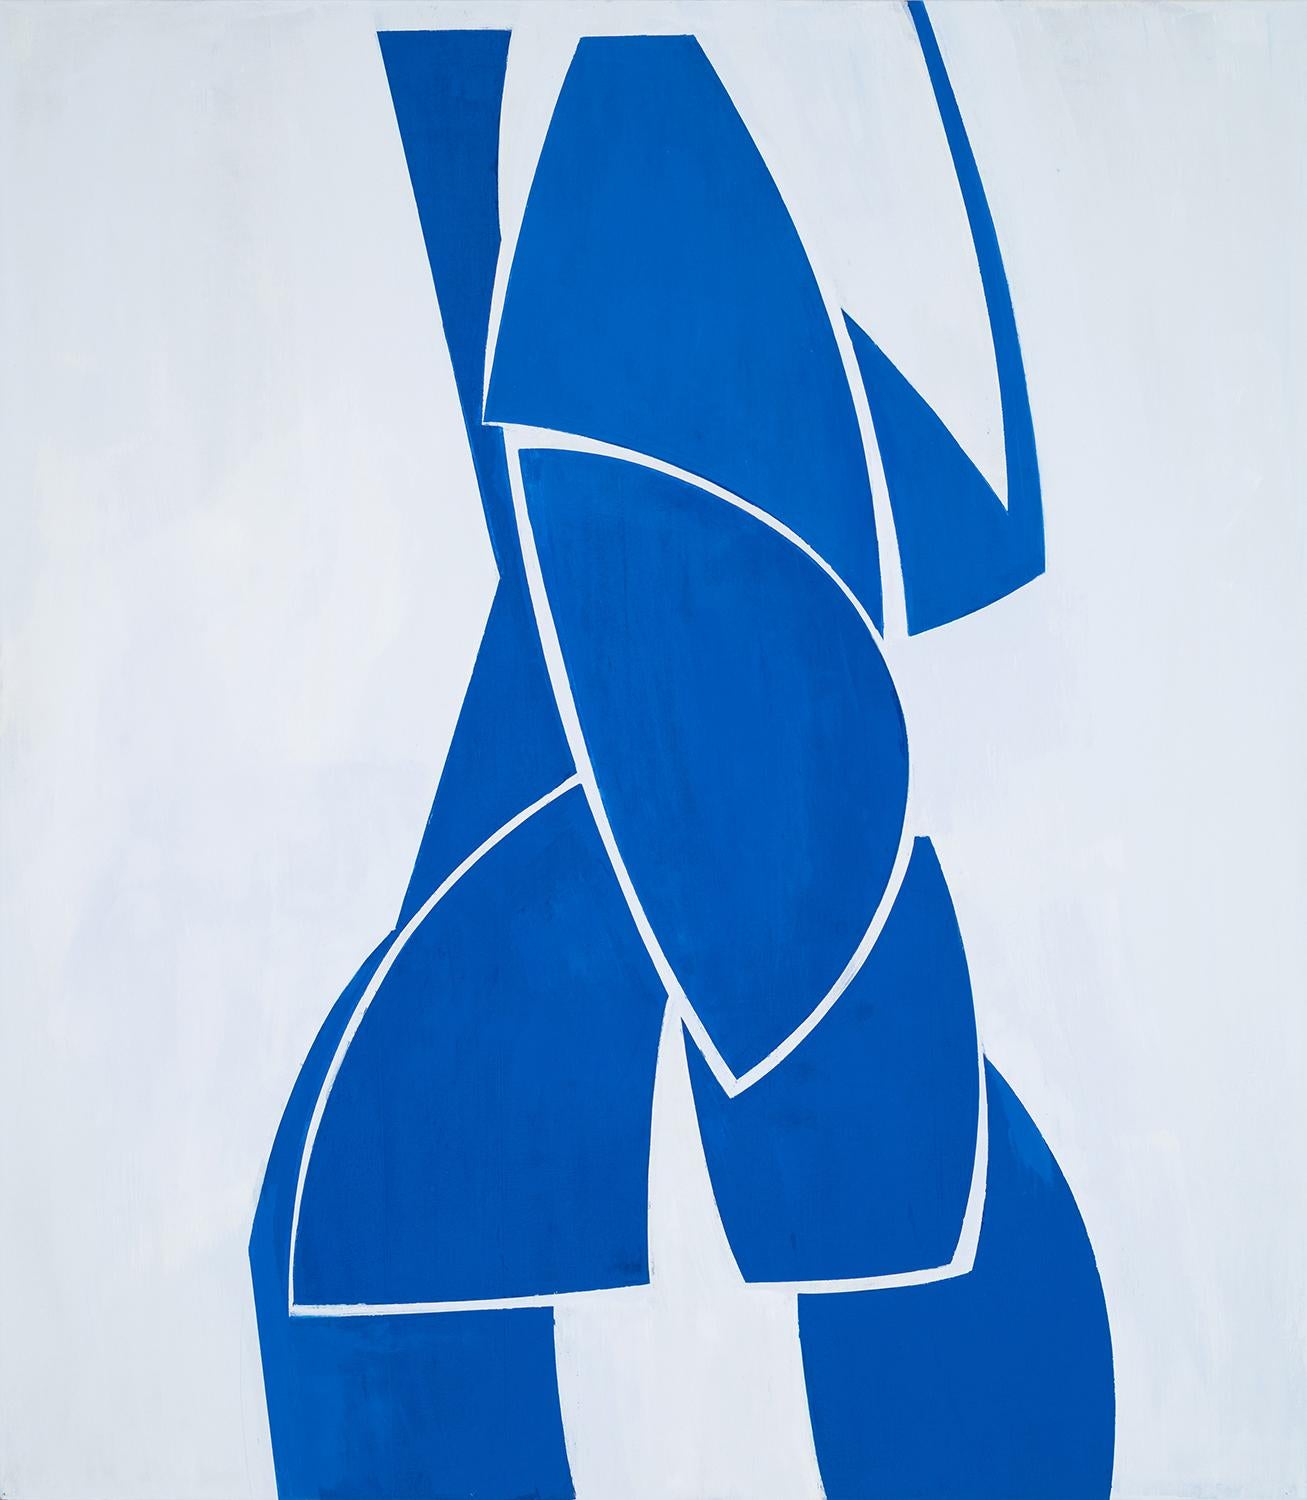 Joanne Freeman
Midnight Lace, 2018
oil on linen
48 x 42 in.

This abstract oil painting on linen features bold blue geometric shapes on a white background with century flair.

"My drawings and paintings utilize geometry and are influenced by